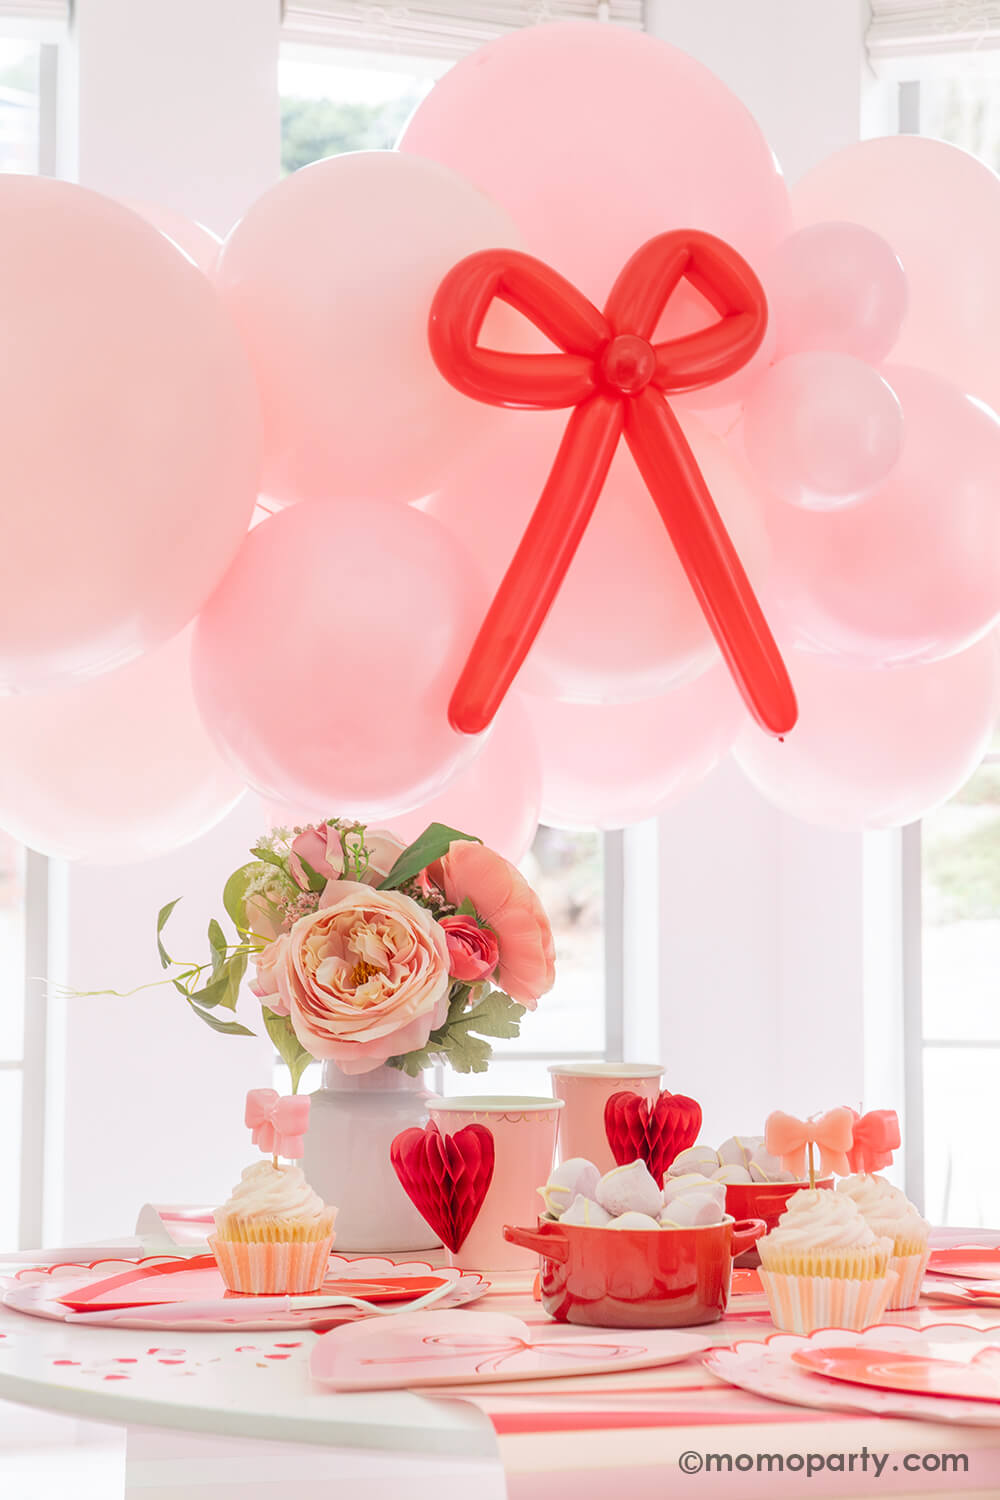 A close up shot of Momo Party's Bow-tiful Valentine's Day Party Box for 8 guests. Featuring a pink balloon garland with red bow balloons on it, heart shaped tableware including plates, napkins and party cups, and a beautiful flower bouquet, this adorable party box in classic Valentine's colors of red and pink is perfect for your Valentine's Day party or Galentine's Day celebration.